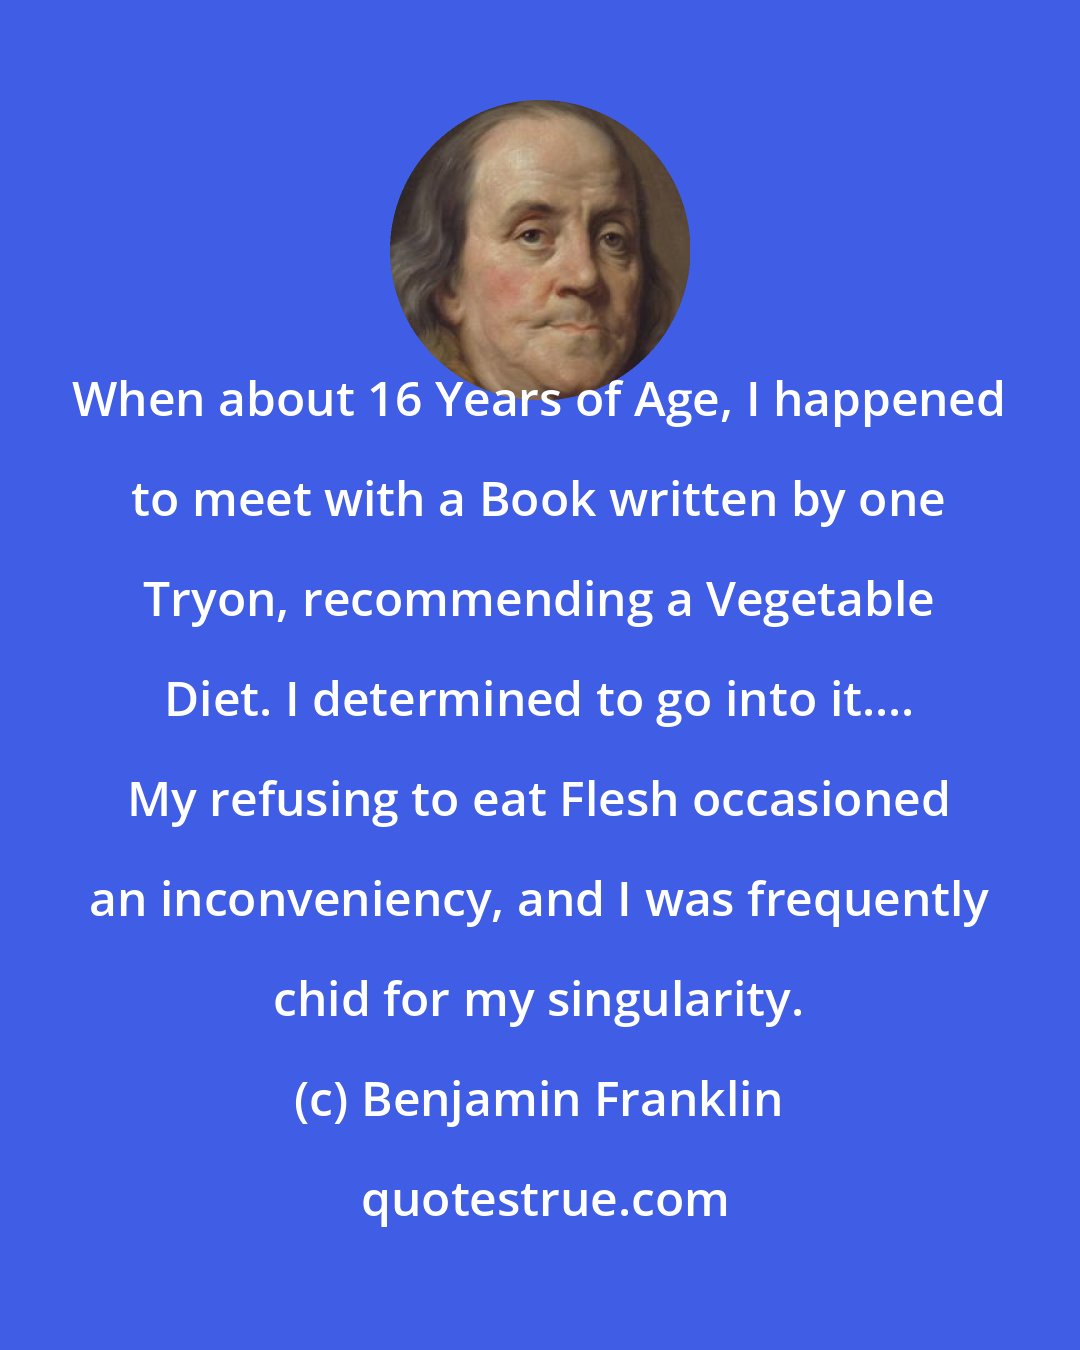 Benjamin Franklin: When about 16 Years of Age, I happened to meet with a Book written by one Tryon, recommending a Vegetable Diet. I determined to go into it.... My refusing to eat Flesh occasioned an inconveniency, and I was frequently chid for my singularity.